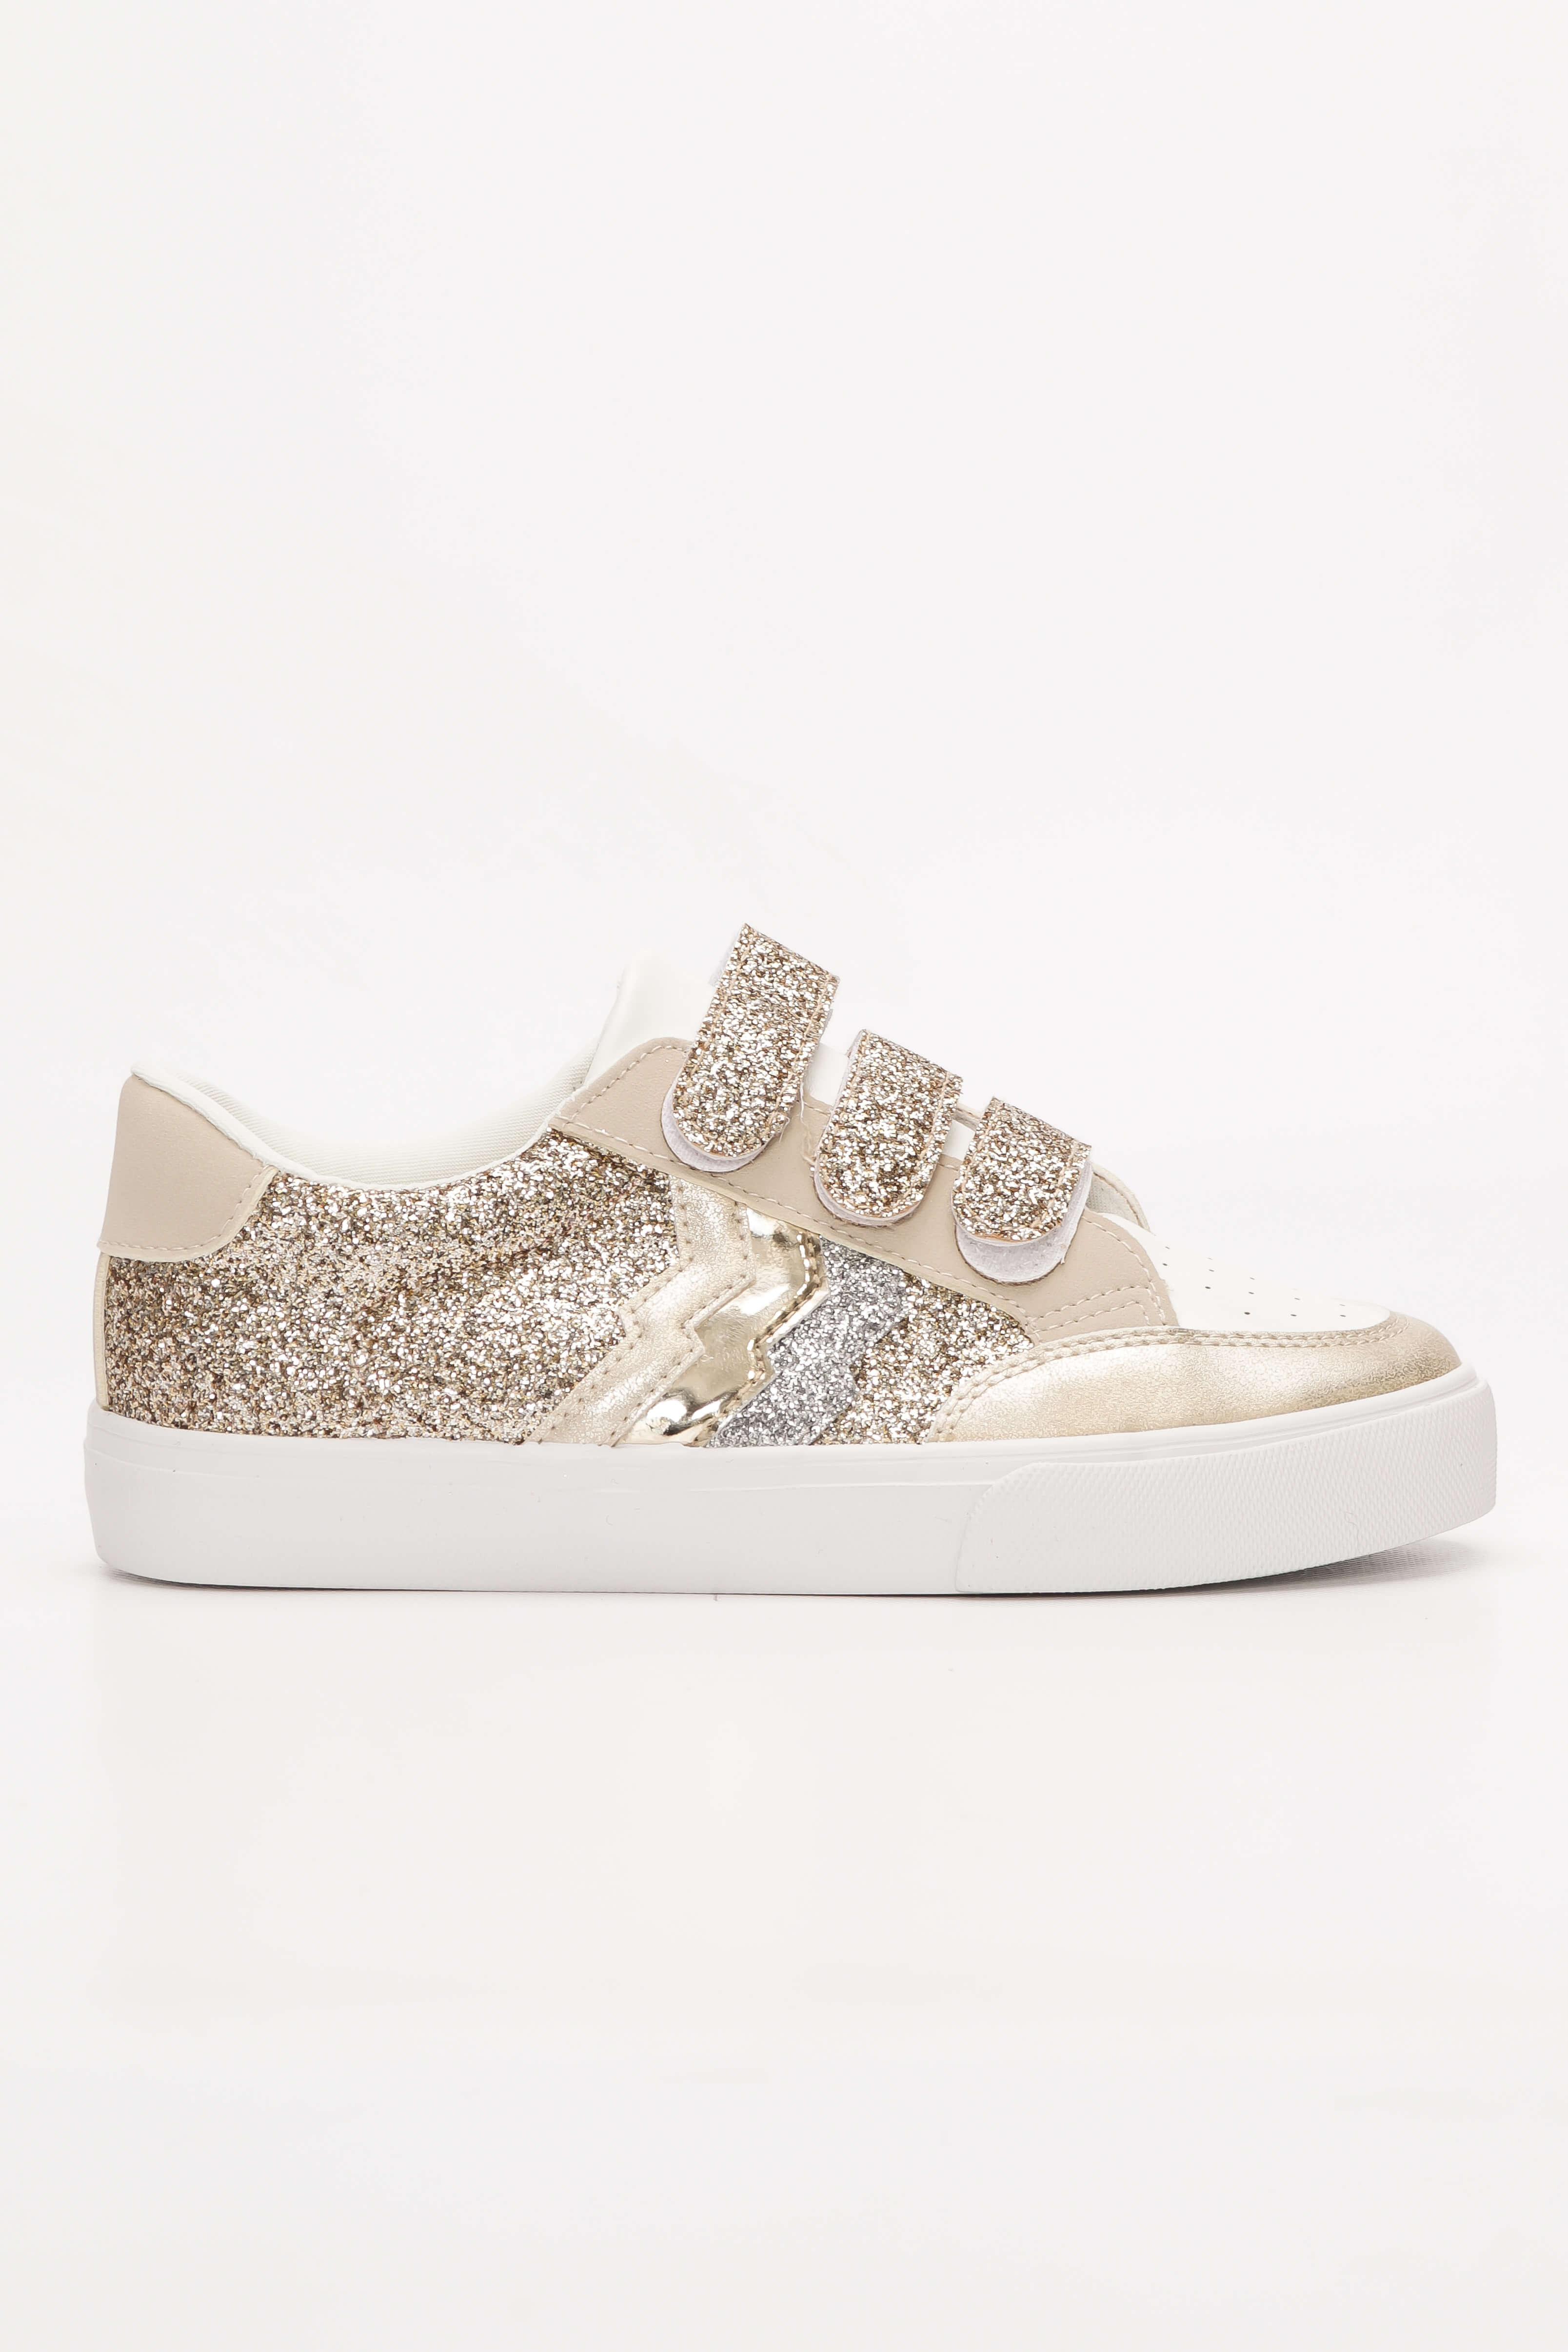 By name Awesome binary Sneakers με Glitter & Scratch – Χρυσό 58445 2022